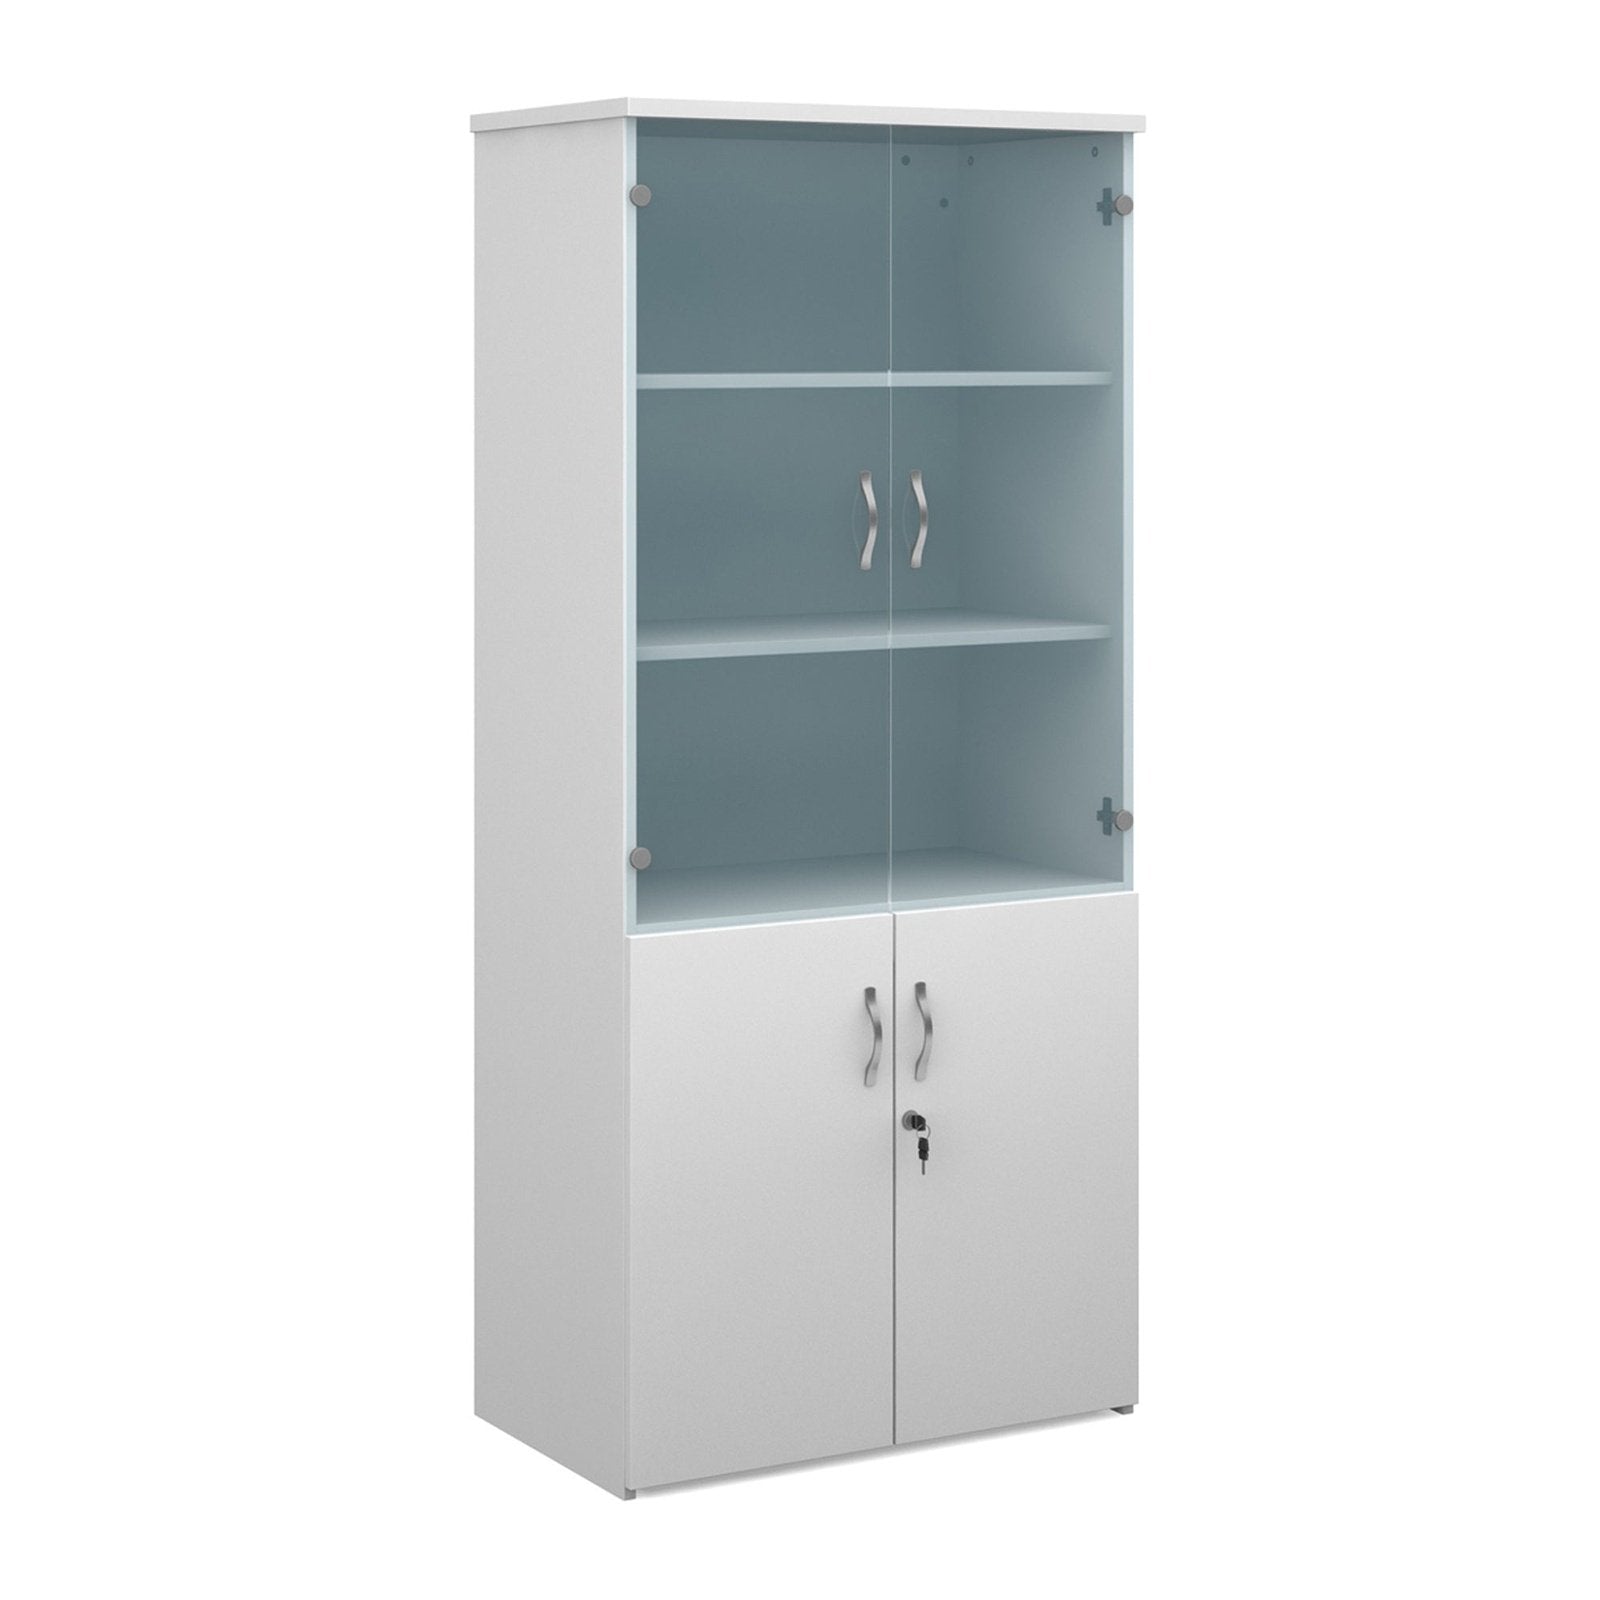 Universal combination unit with glass upper doors - Office Products Online